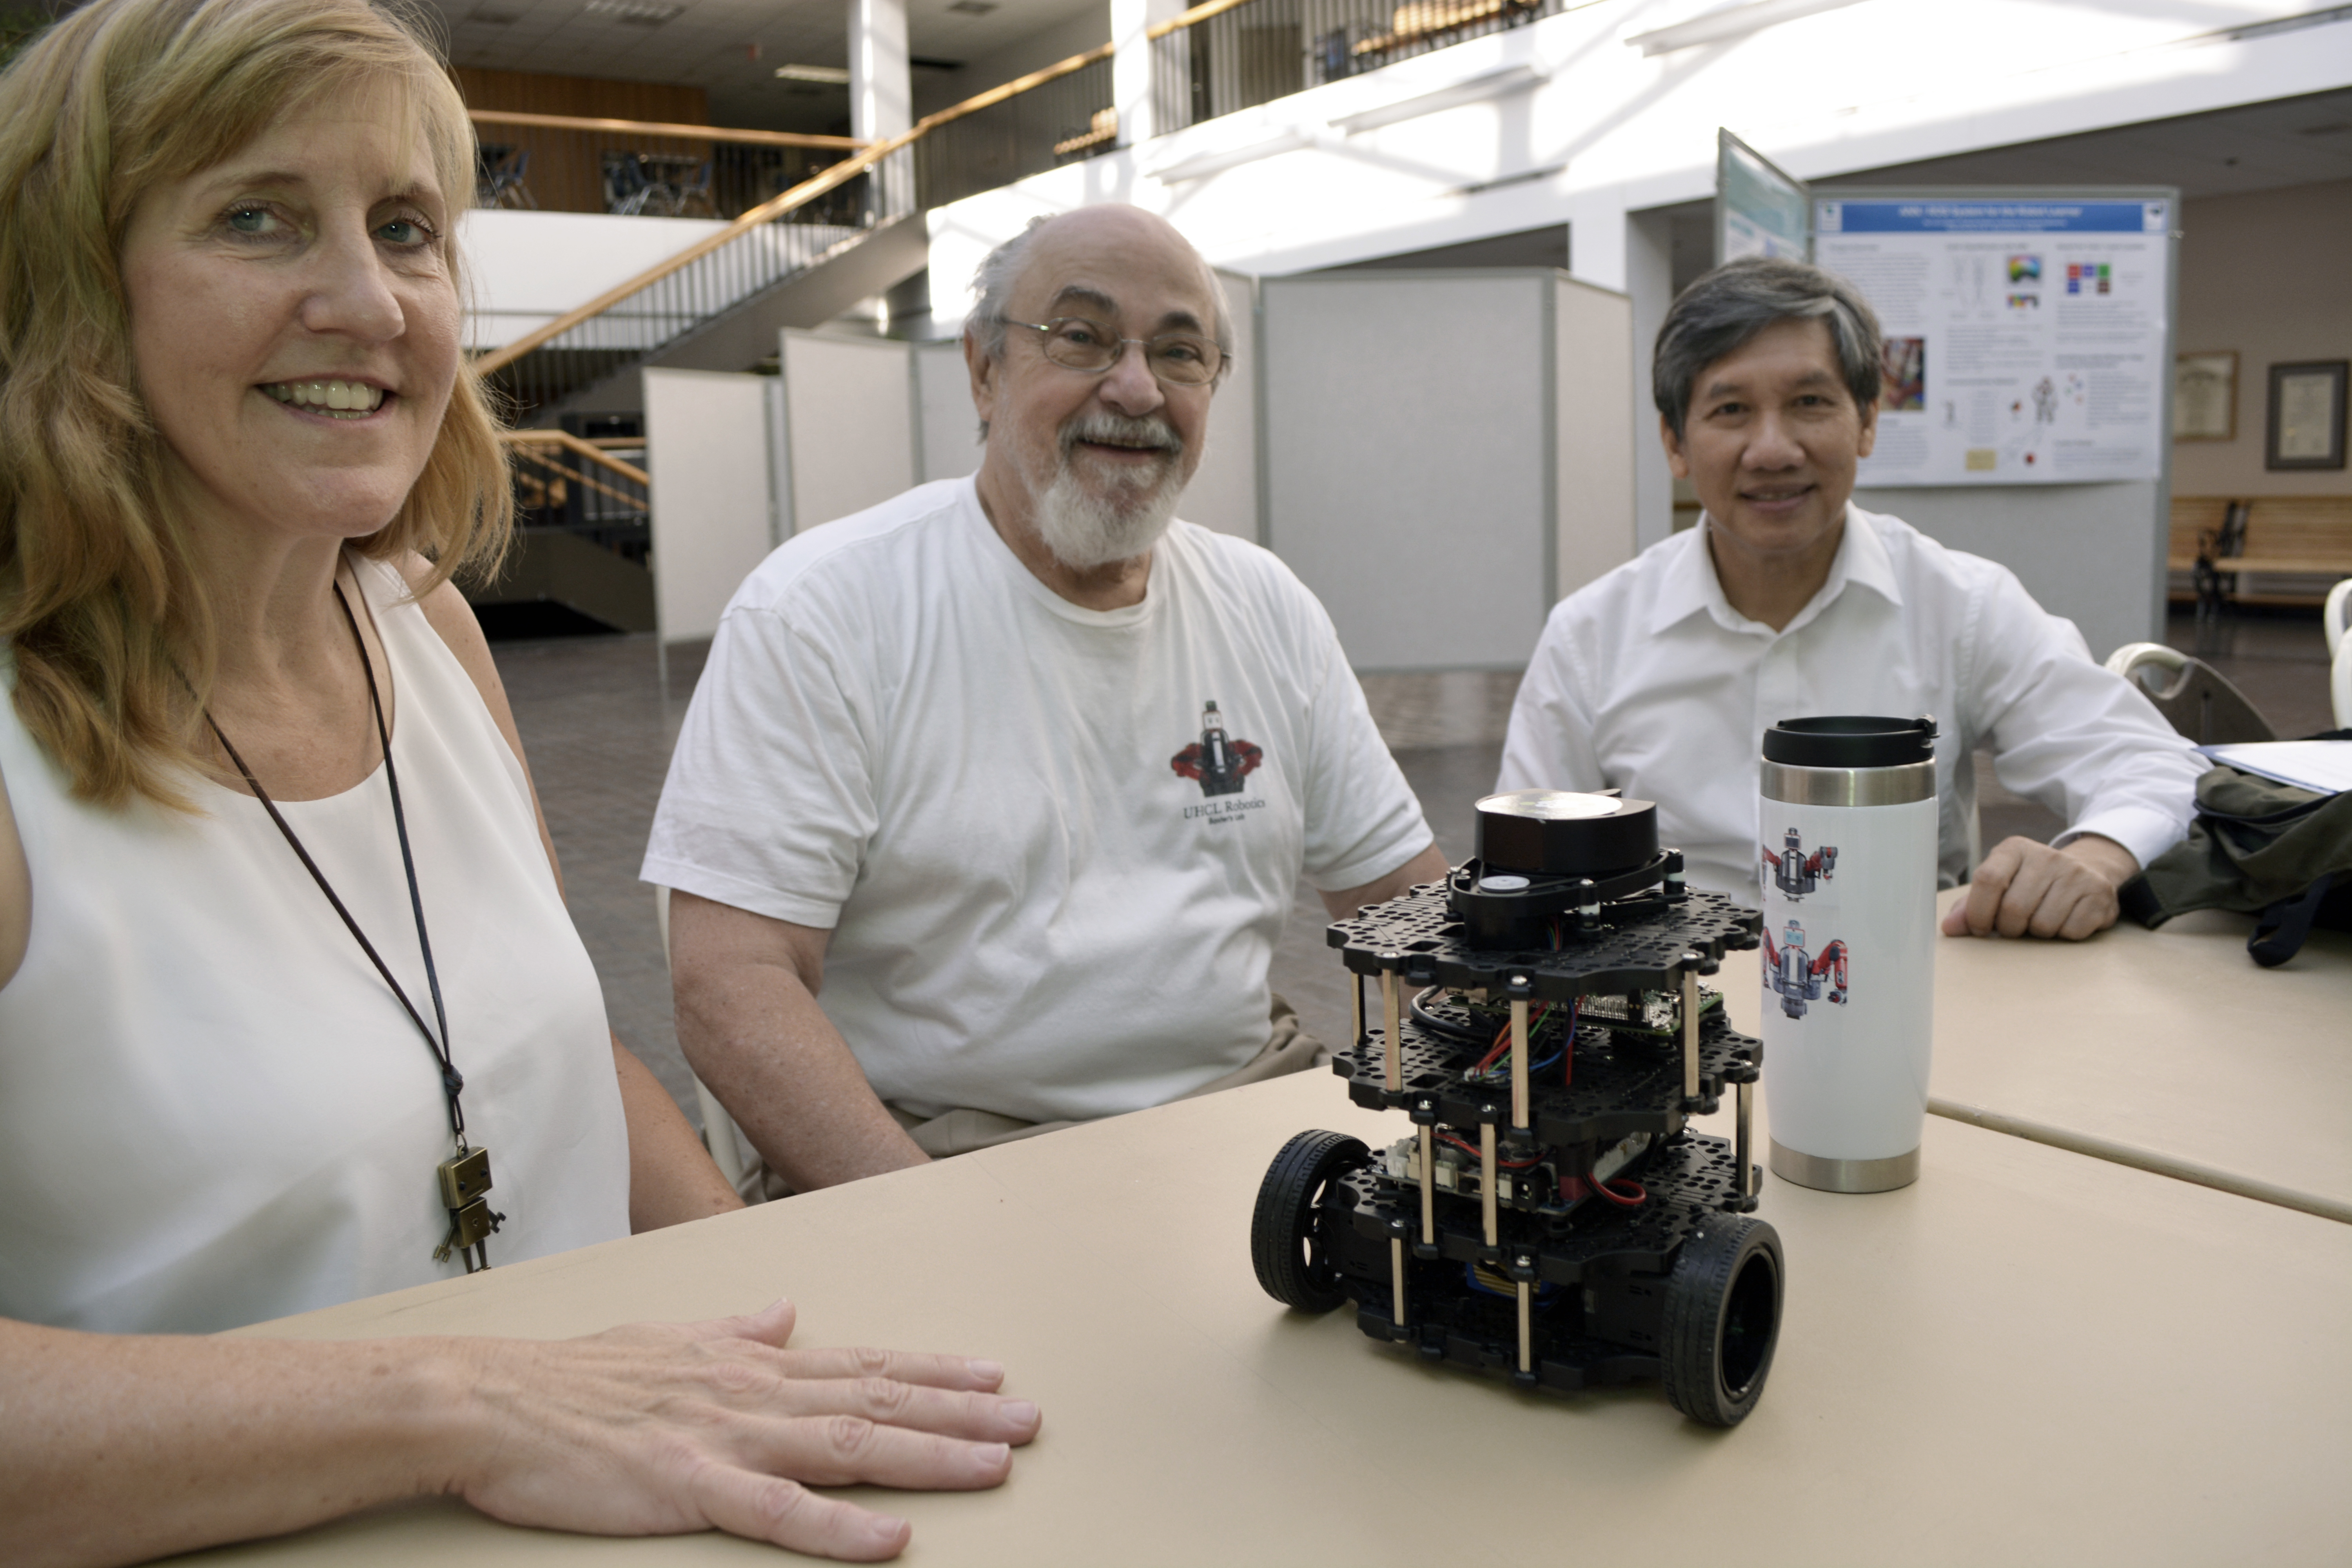 Photo: More than 60 educators, engineers, students and others listened to 20 research presentations and demonstrations at the second annual Robotics & AI Day, hosted by University of Houston-Clear Lake’s Center for Robotics Software in collaboration with San Jacinto College, University of Houston, Rice University, NASA and area businesses. Pictured (l-r) are Center Co-Director and UHCL Visiting Researcher Carol Fairchild; Center Director Thomas L. Harman, professor of Computer Engineering and chair of the Engineering Department; and Assistant Professor of Computer Engineering Luong Nguyen, who is faculty adviser to UHCL’s swarm-robotics team in NASA-hosted competitions. With them is Turtlebot 3, an extensible robot that thousands of developers use to learn how to program in Robot Operating System. Faculty and students from throughout the Greater Houston area presented topics such as robot mechanisms, motion planning, manipulation, robot swarm technology and robot programming. Learn more about UHCL’s science and engineering centers and outreach programs at www.uhcl.edu/science-engineering/centers-initiatives. Photo courtesy of the Office of University of Communications.